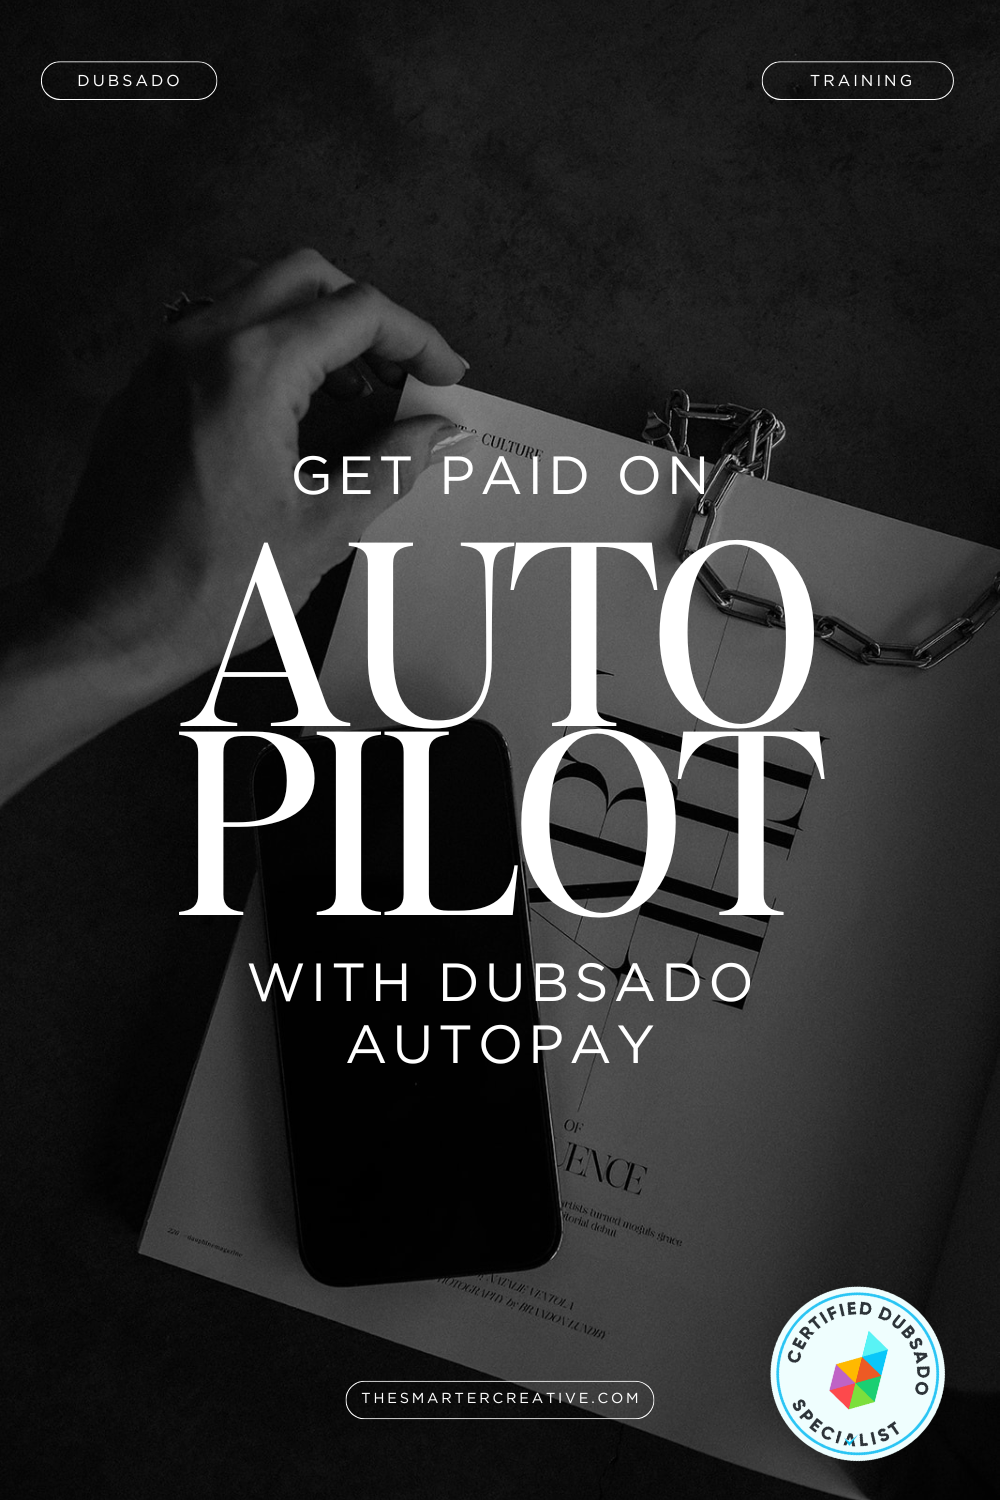 A hand reaches for a stack of papers, with text overlay that reads "Get paid on AUTOPILOT with Dubsado Autopay." The image promotes a Dubsado training by a certified specialist.